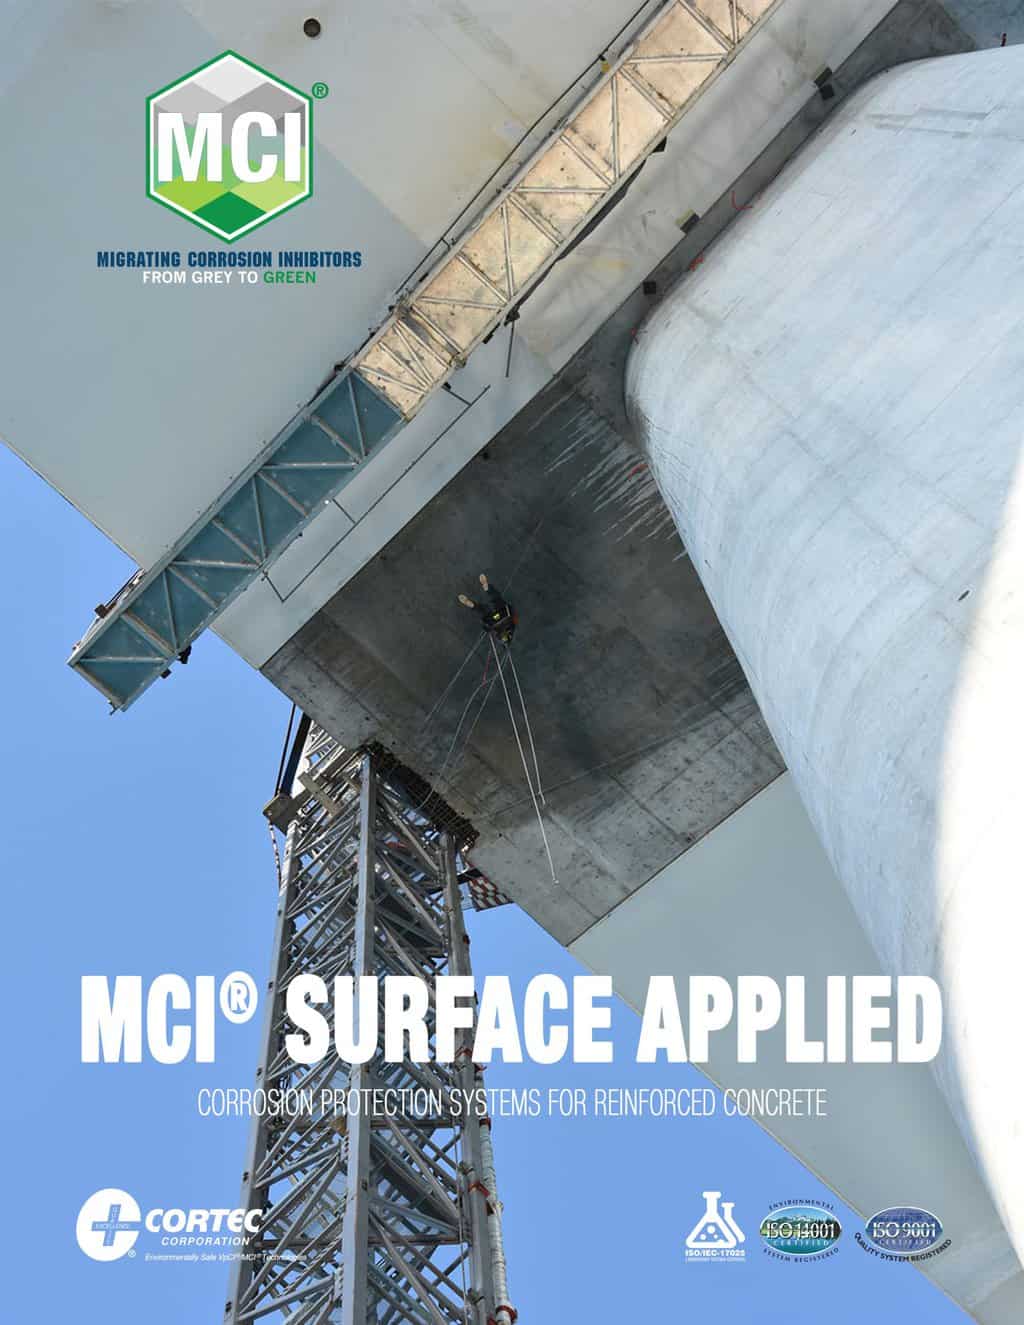 surface treatment brochure showing mci products